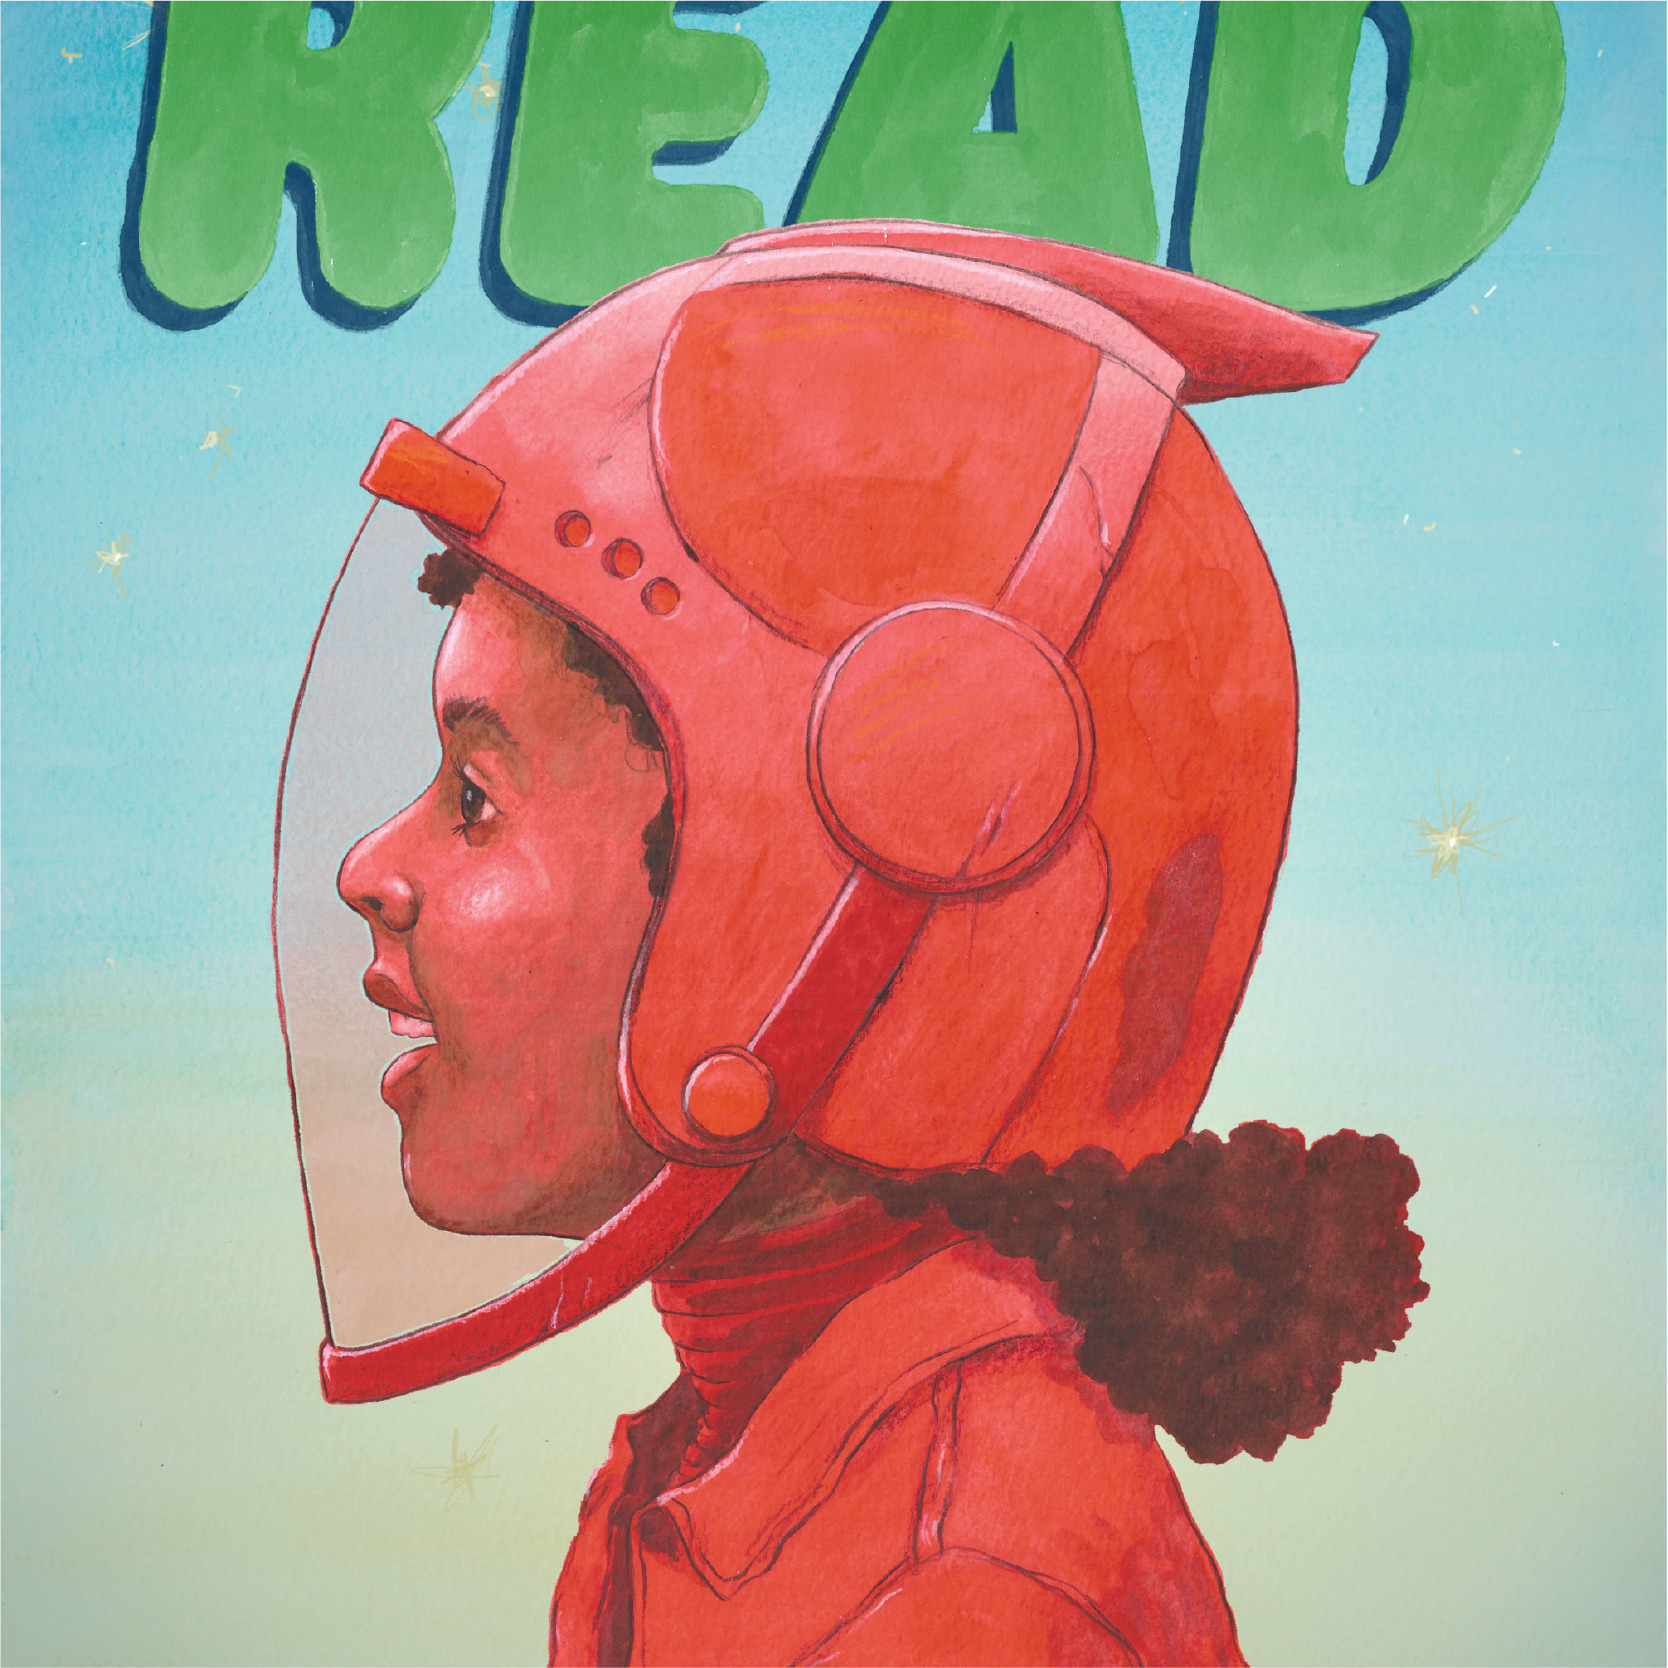 Watercolor portrait of a kid wearing a space helmet, painted red, with the word "Read" above; by Robert Liu-Trujillo.